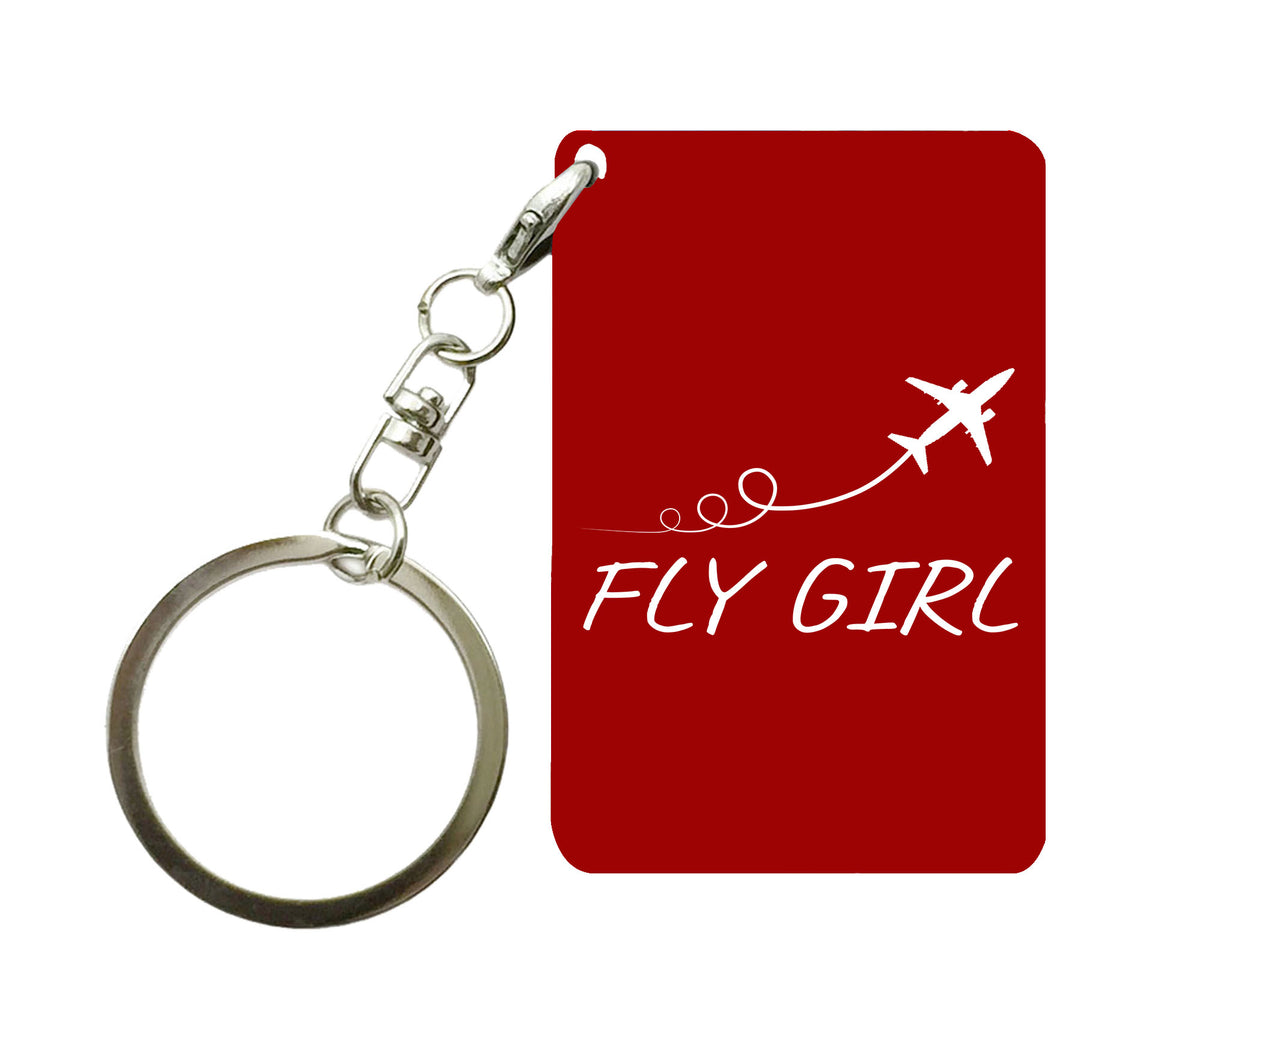 Just Fly It & Fly Girl Designed Key Chains